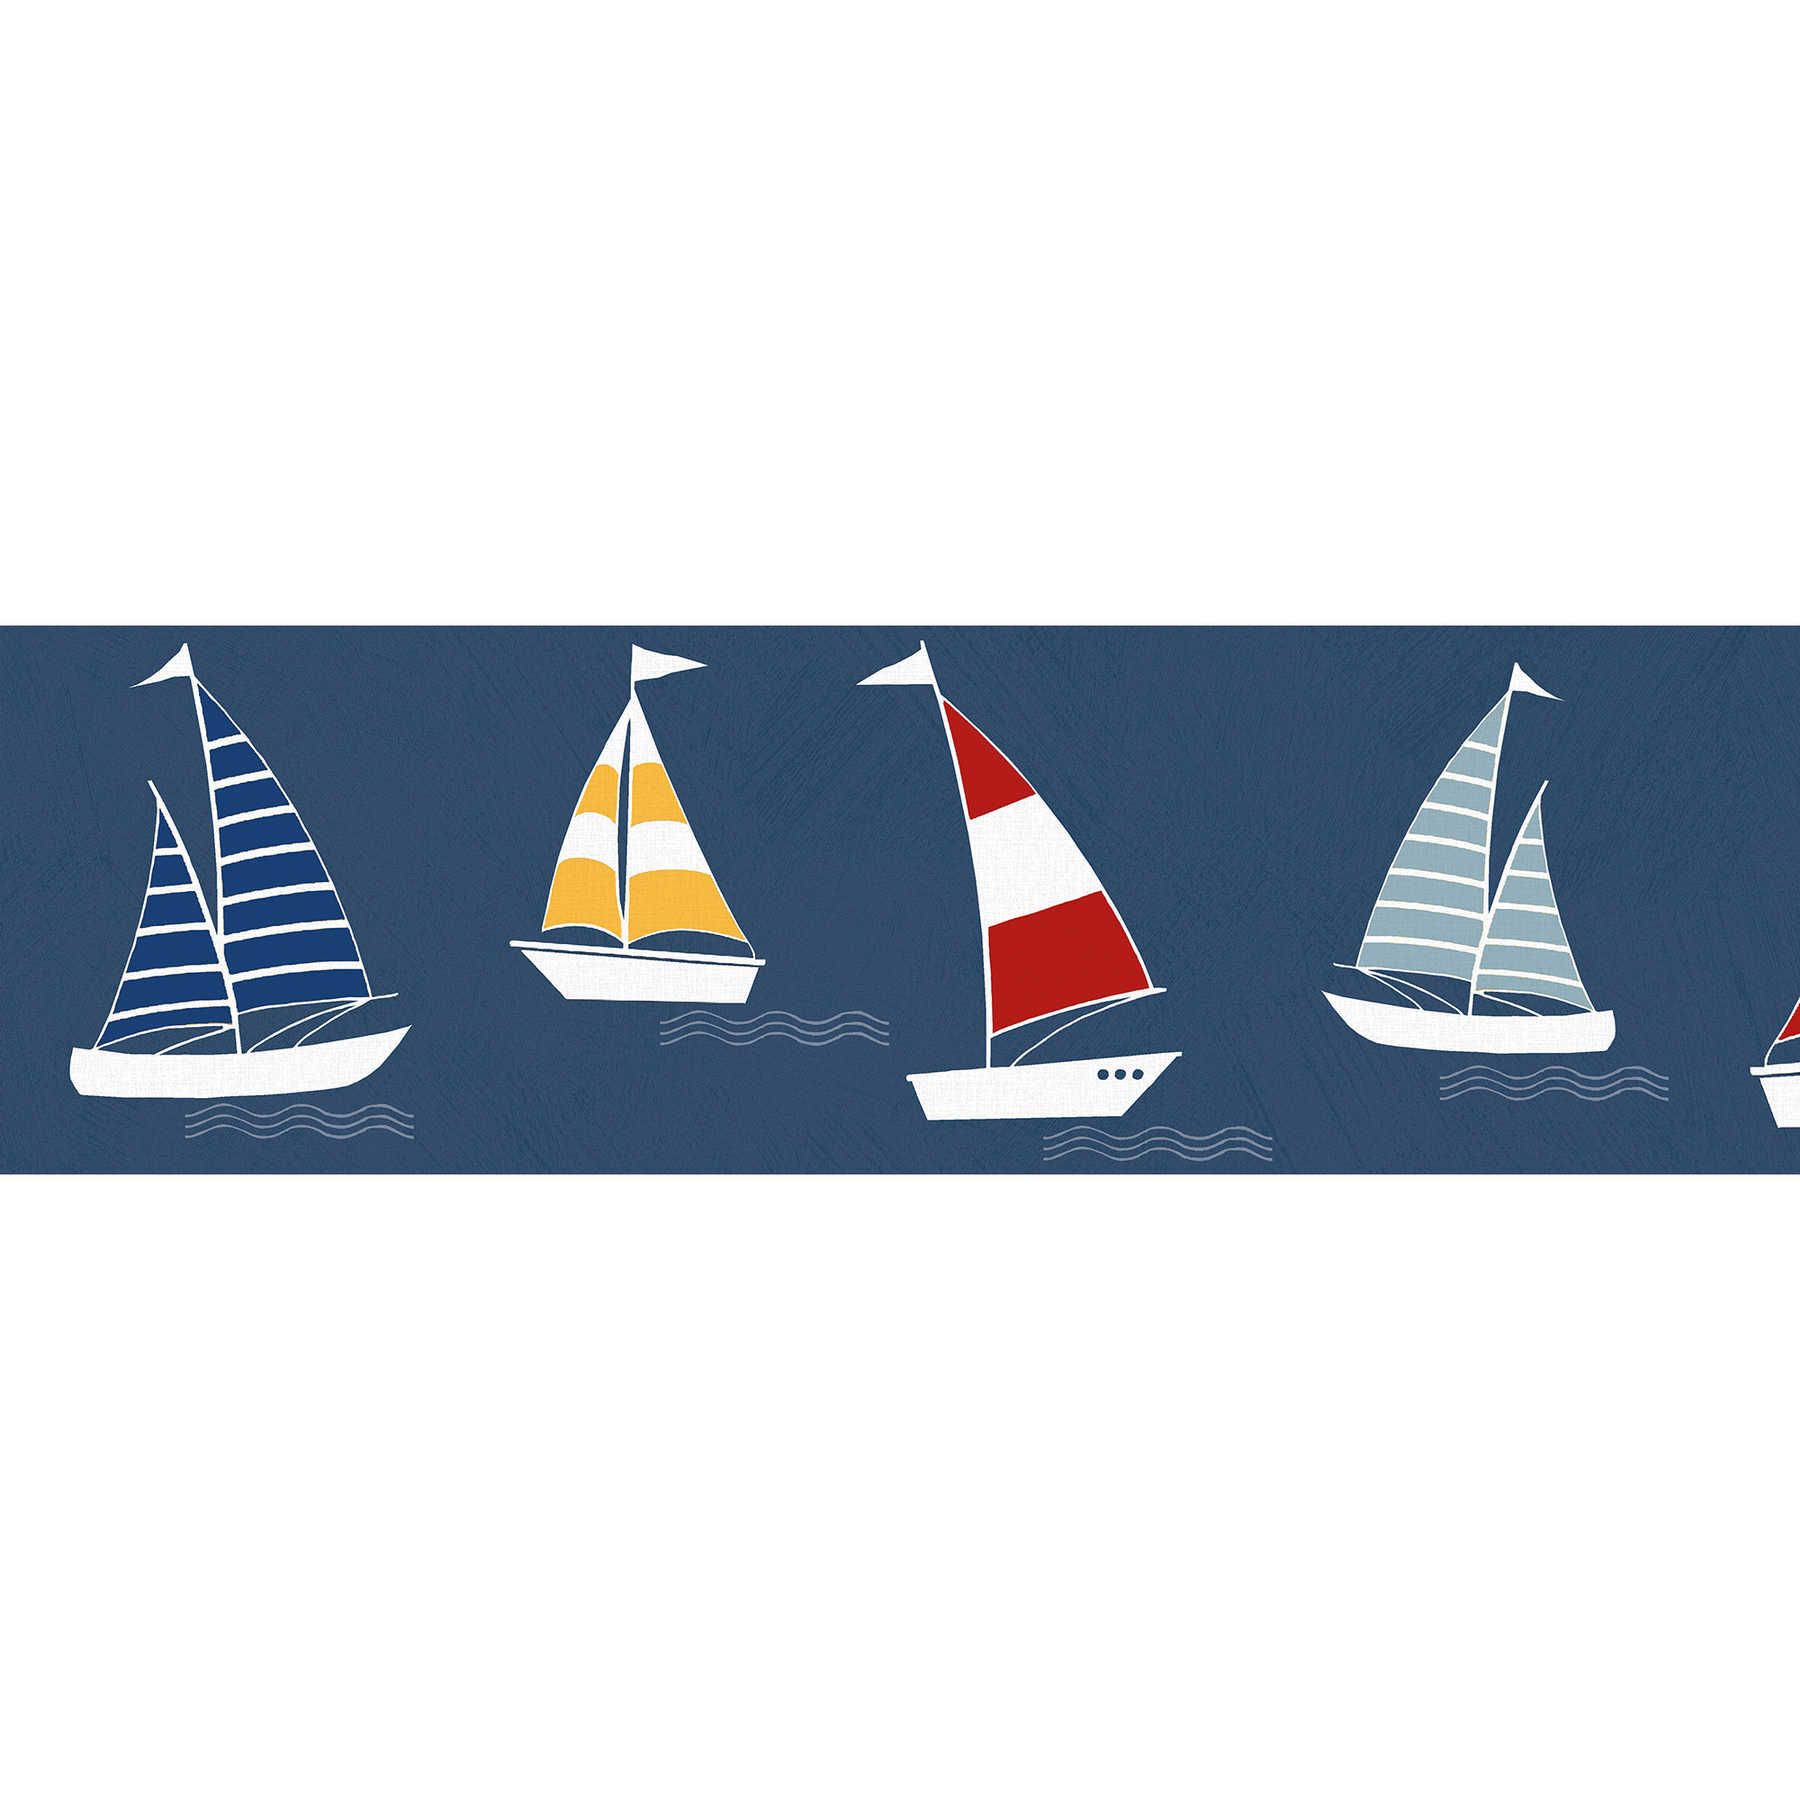         Children border "Sailboats" for boys room - blue, red, yellow
    